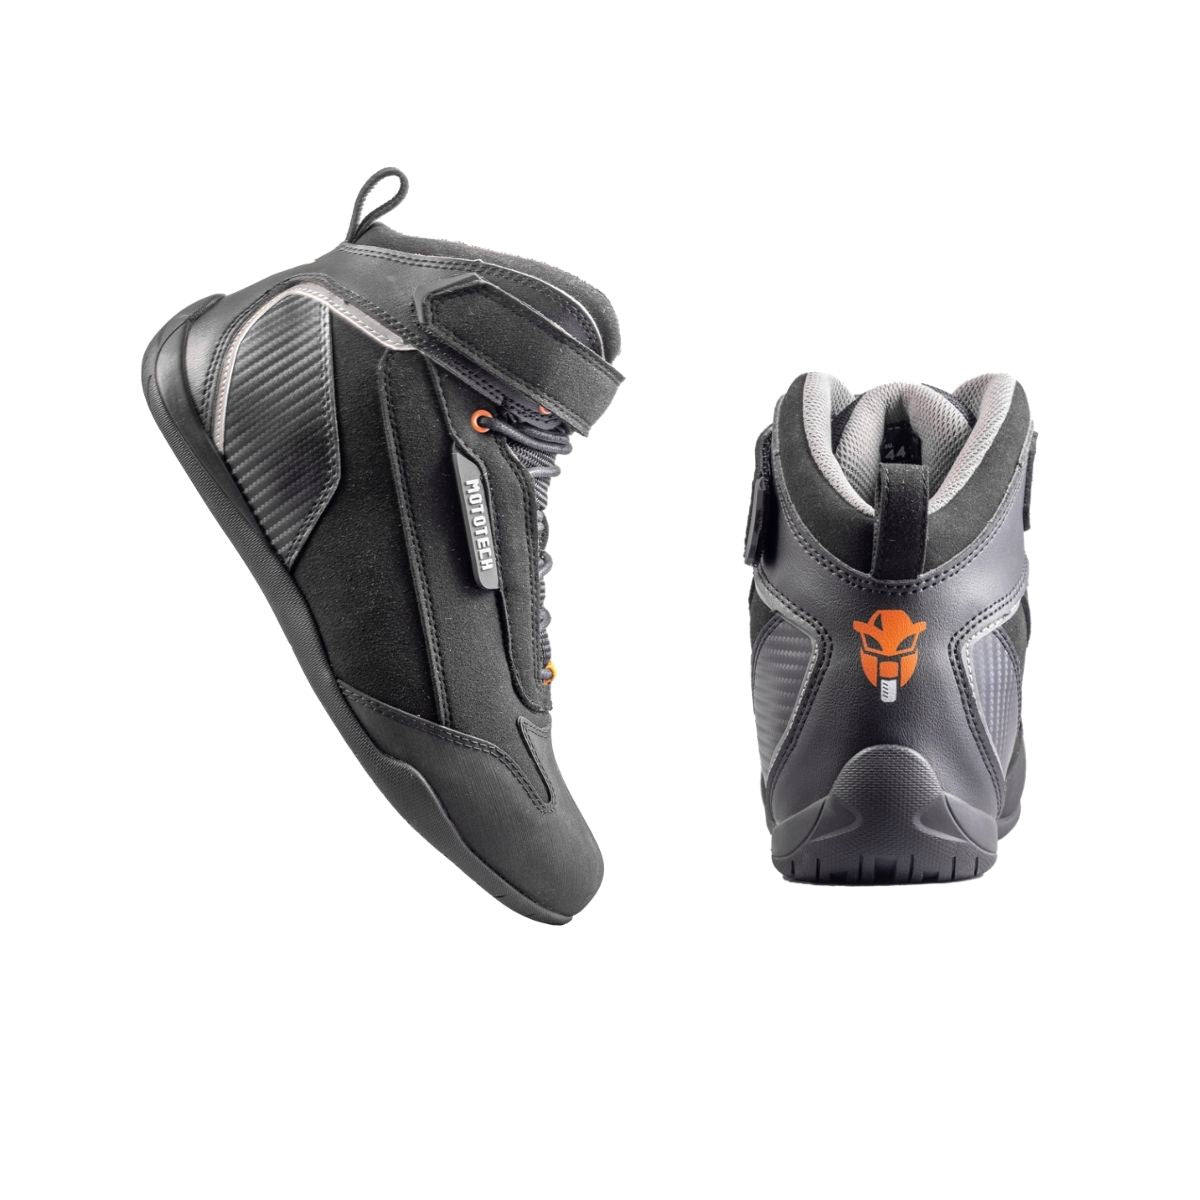 Urbane Short Motorcycle Protective Riding Boots